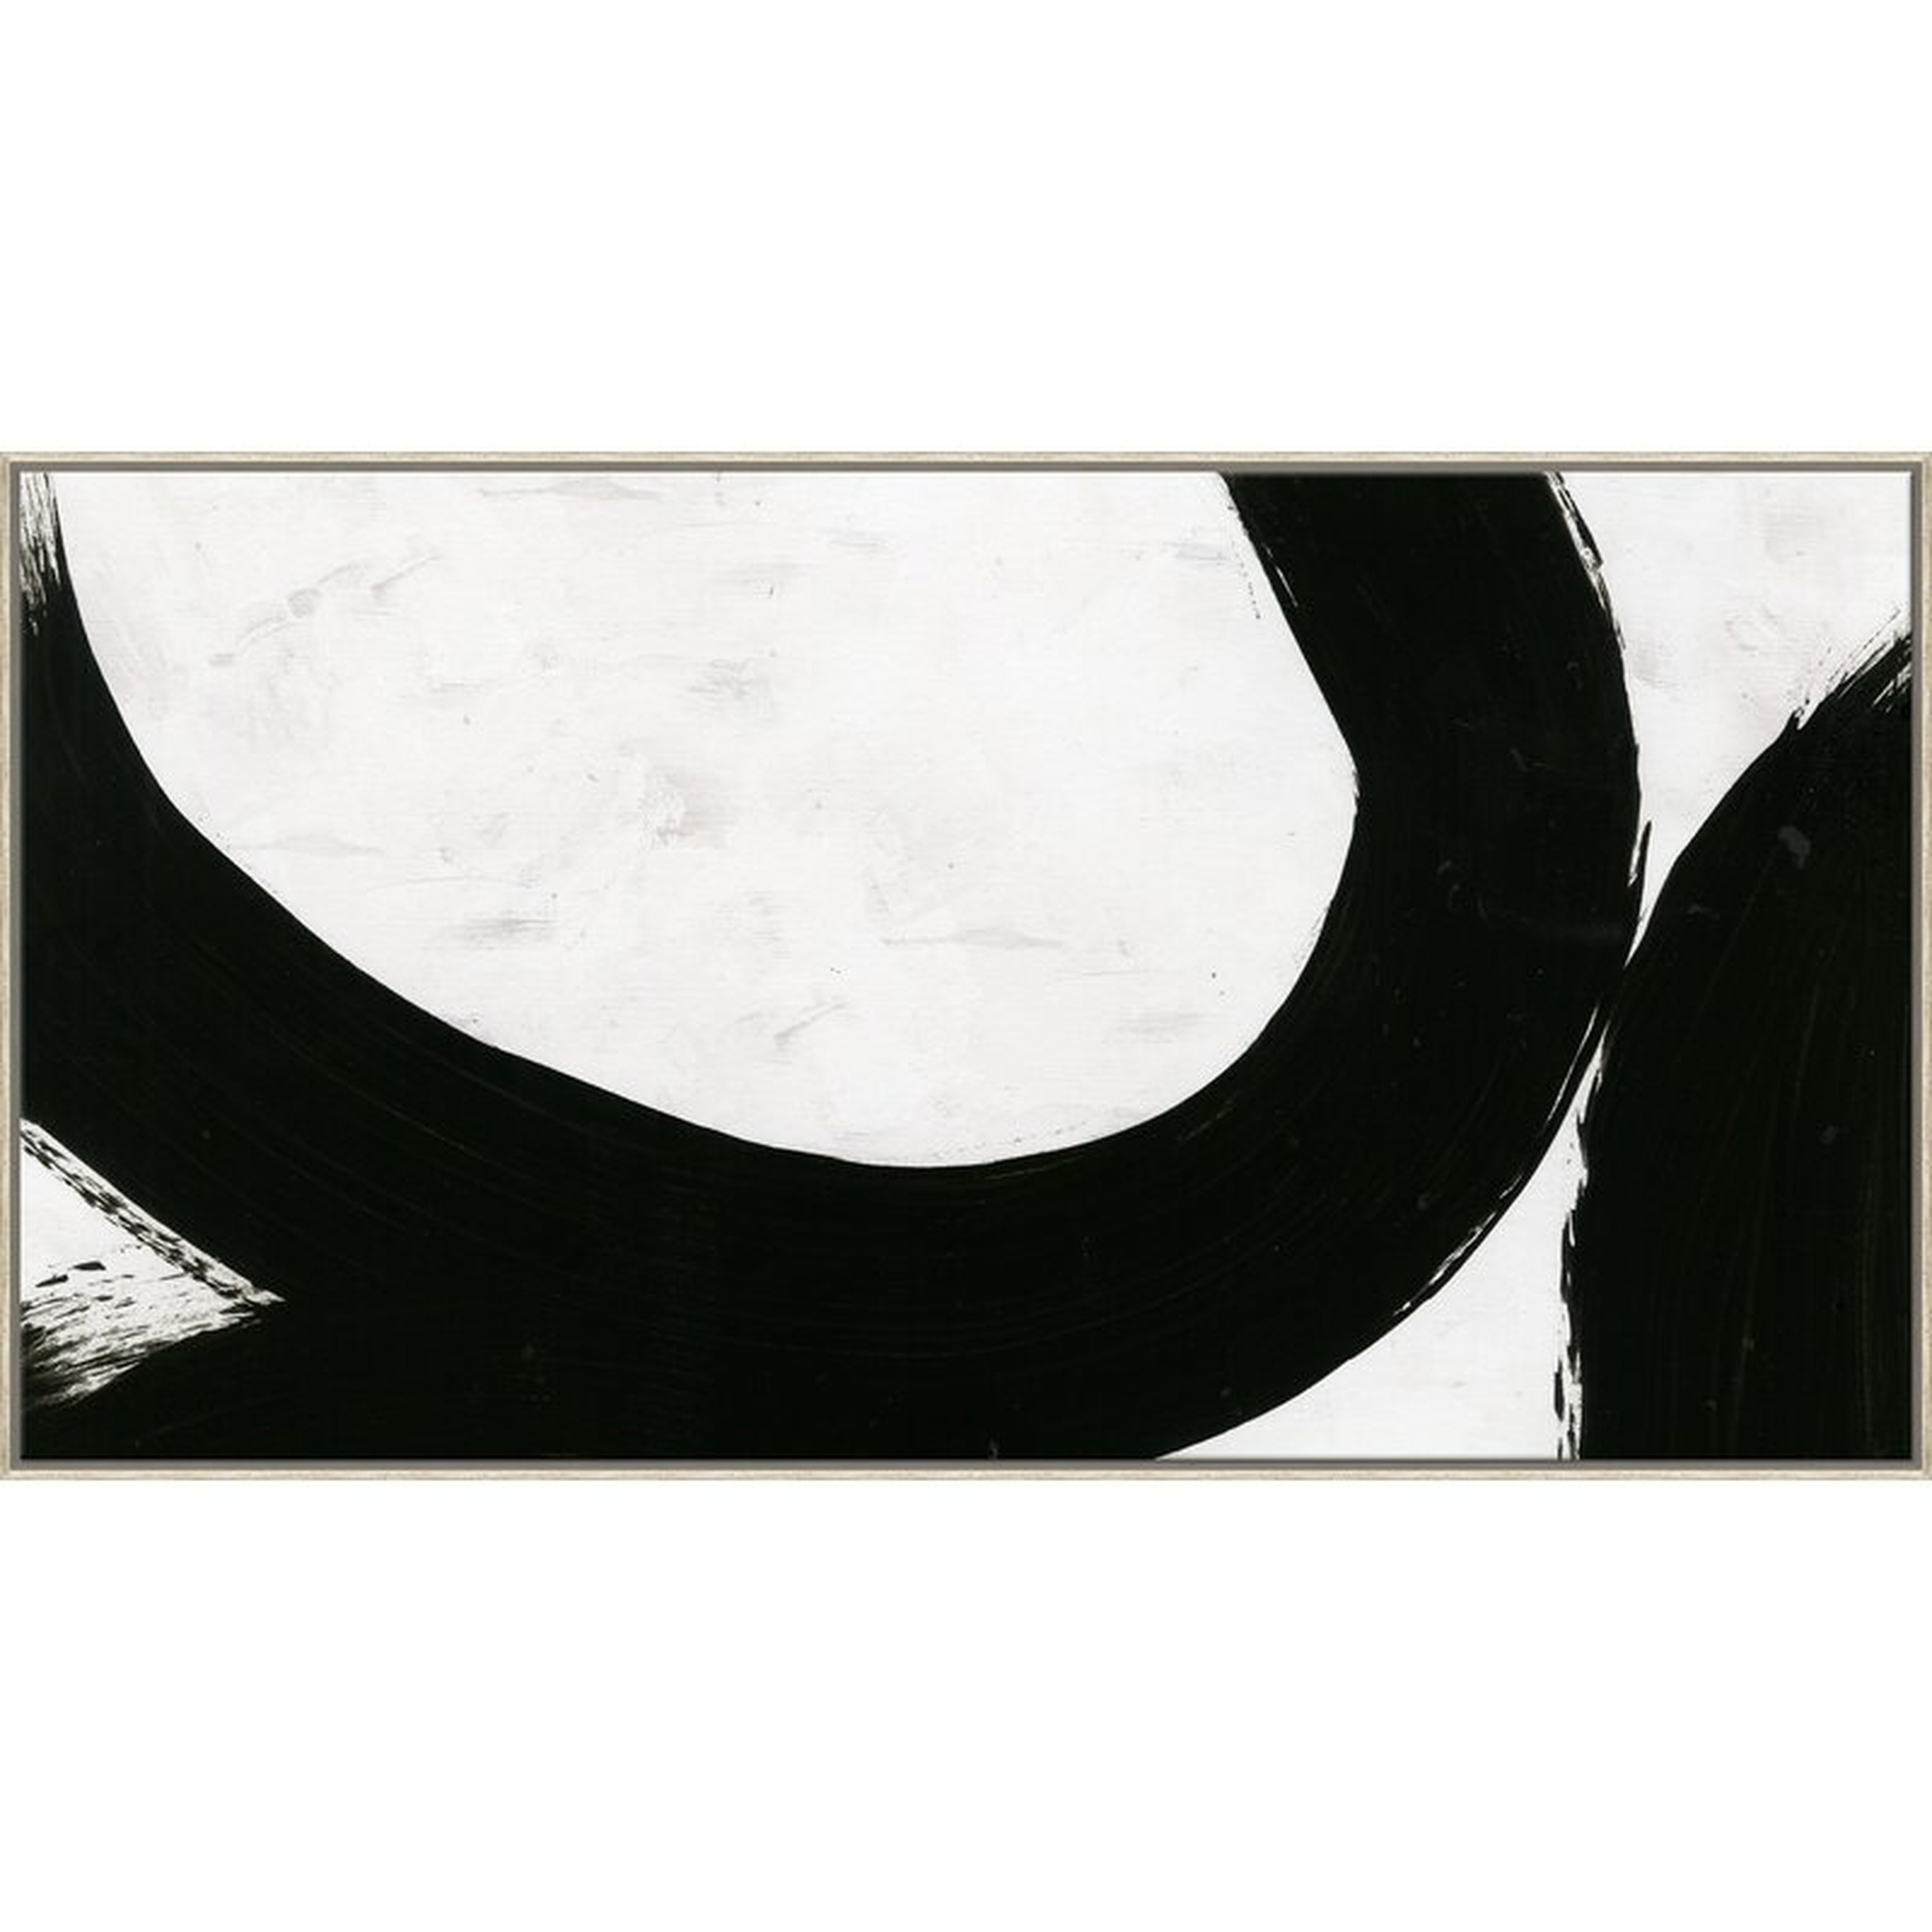 Black and White Circle by Tobi Fairley - Picture Frame Print on Canvas - 25hx47w - Perigold